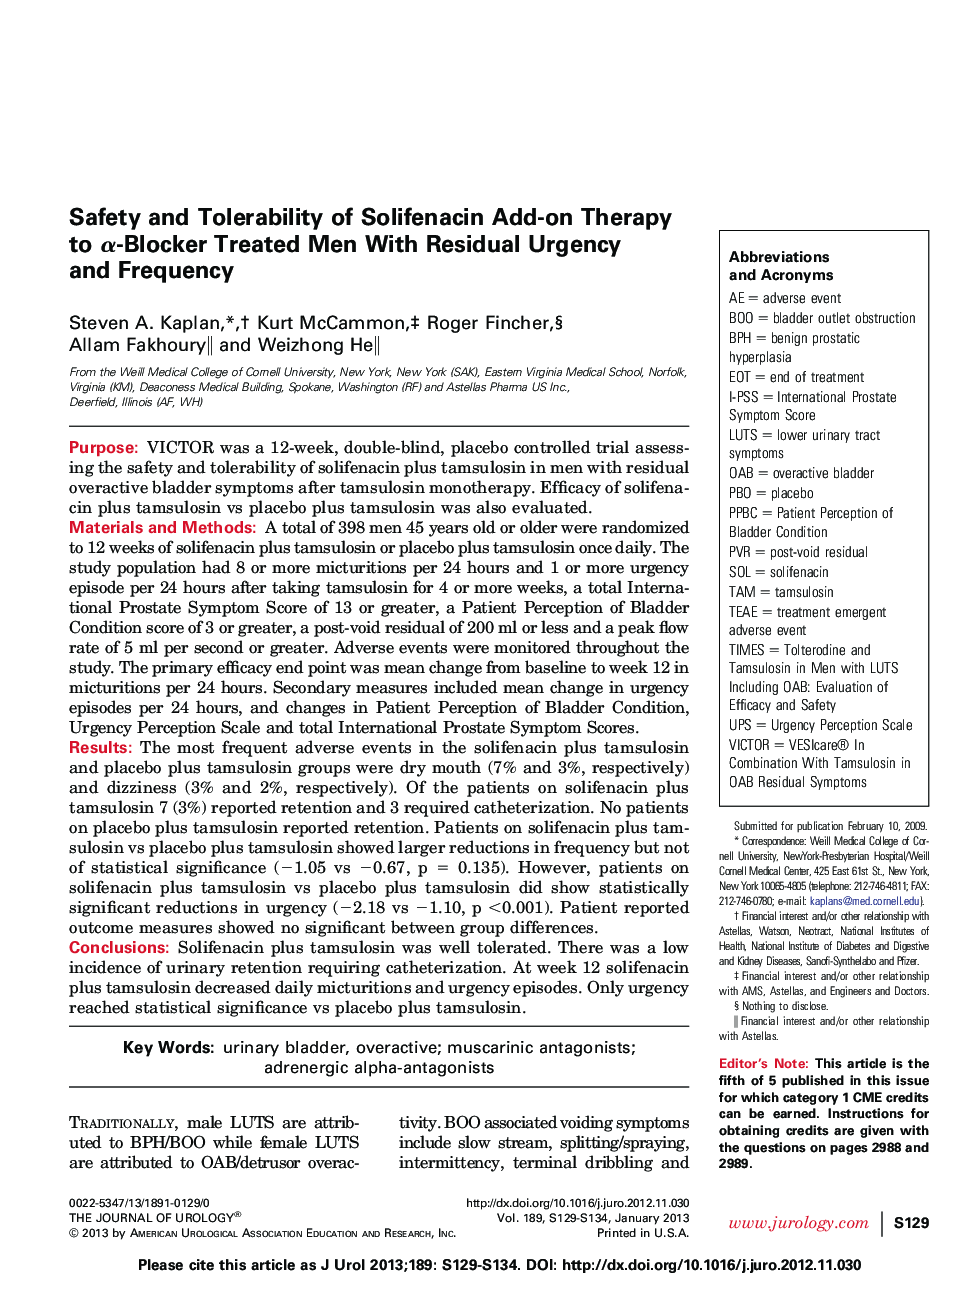 Safety and Tolerability of Solifenacin Add-on Therapy to Î±-Blocker Treated Men With Residual Urgency and Frequency